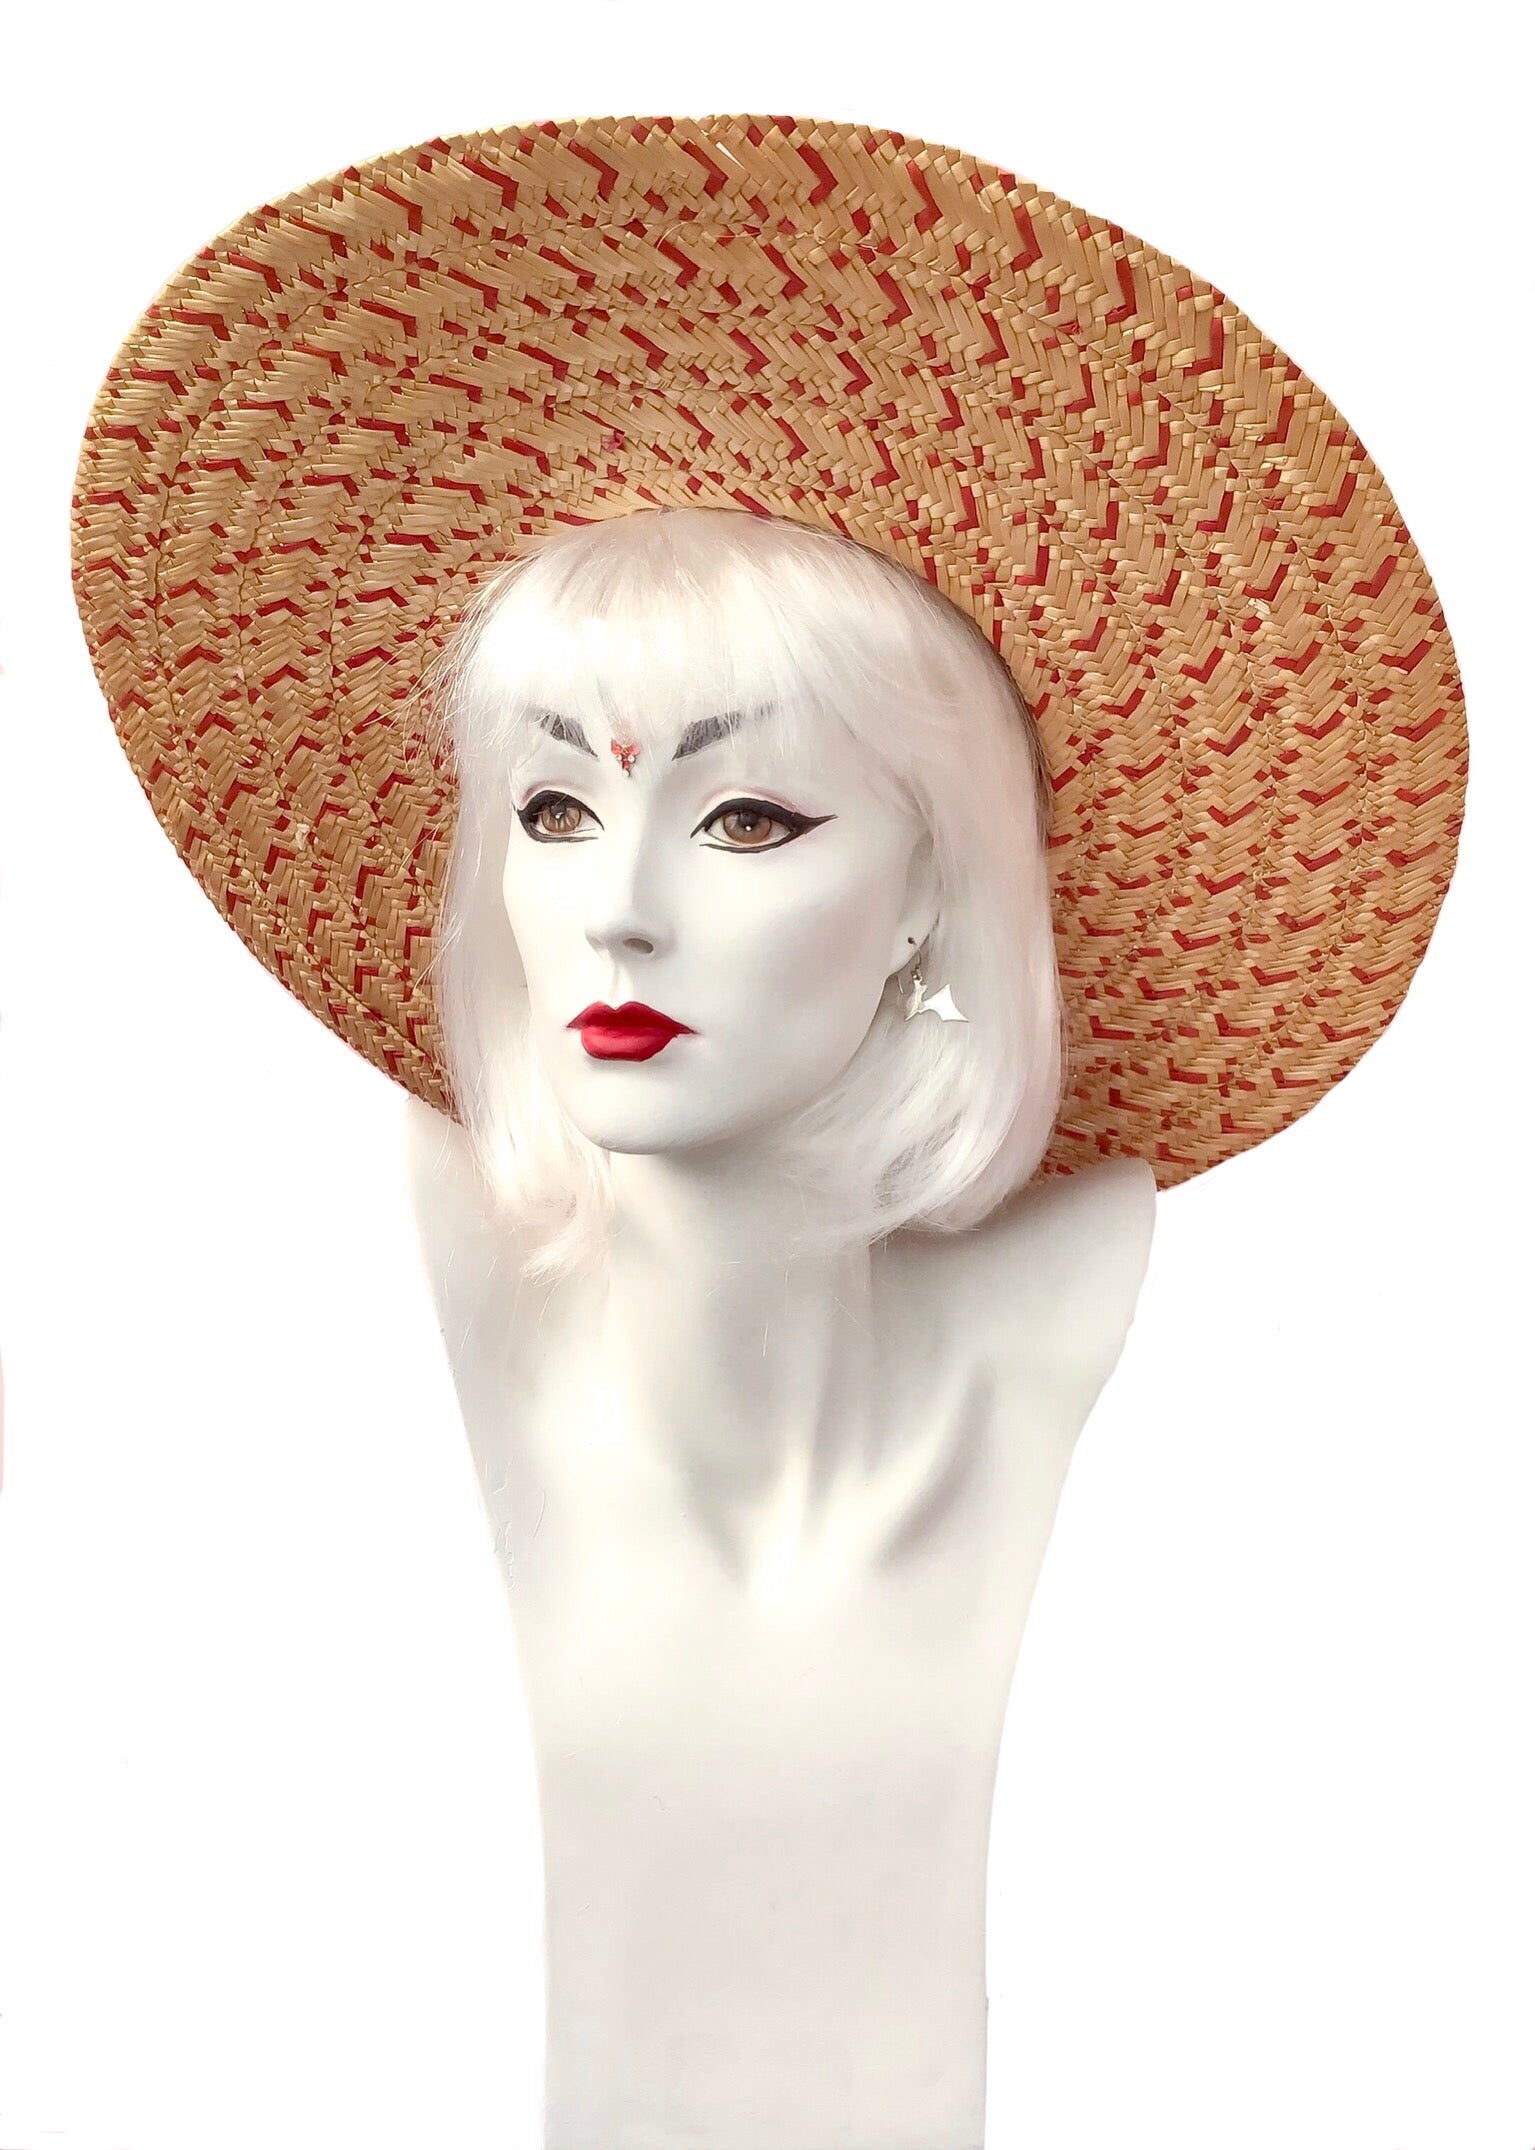 Huge vintage wide brim straw sun hat with red woven straw and natural, fab rockabilly hat to keep you cool and shady